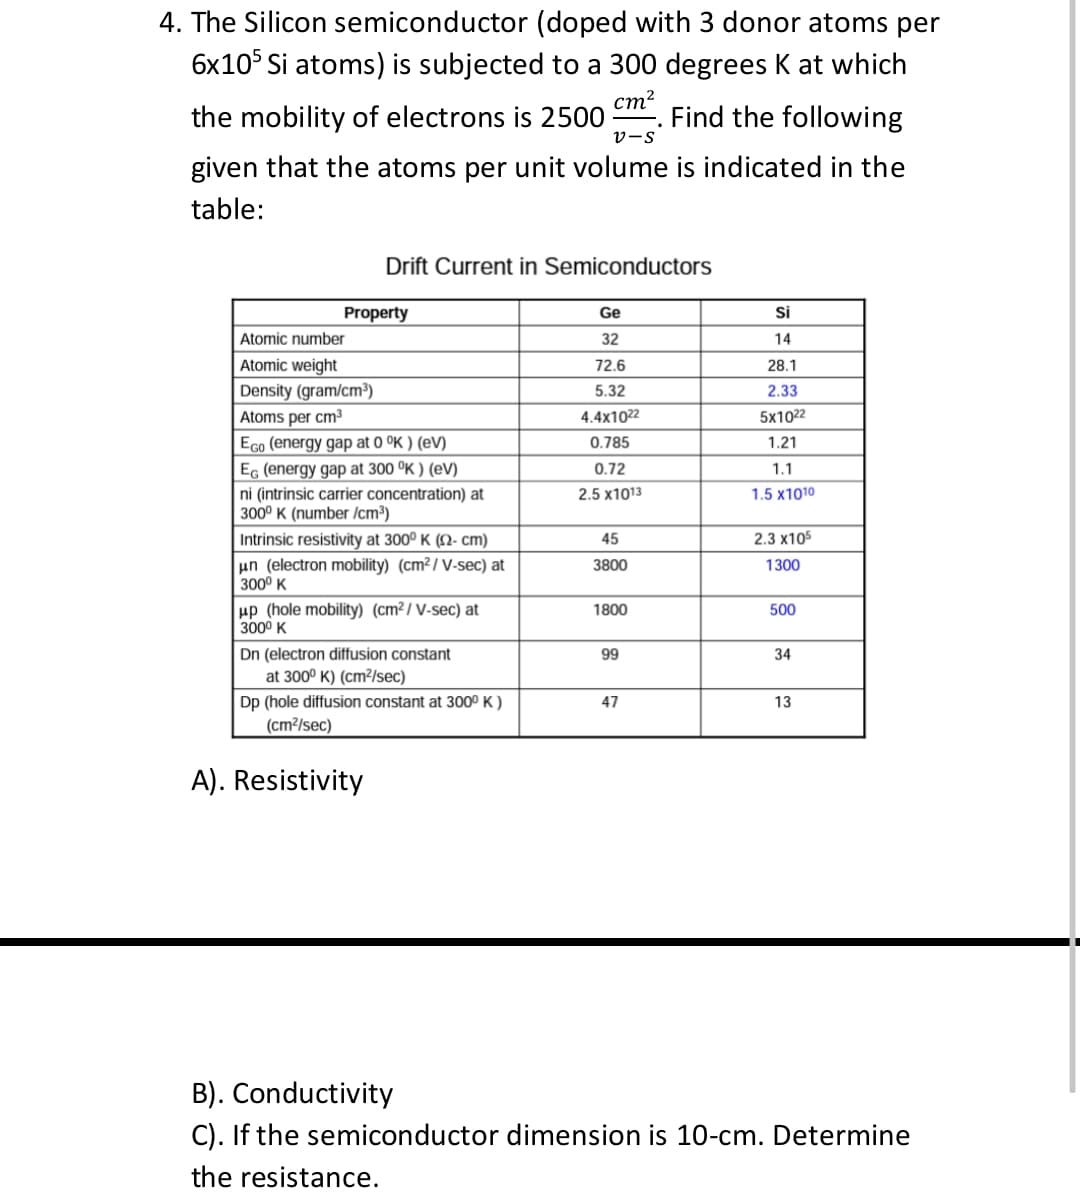 4. The Silicon semiconductor (doped with 3 donor atoms per
6x10 Si atoms) is subjected to a 300 degrees K at which
the mobility of electrons is 2500
cm?
Find the following
v-s
given that the atoms per unit volume is indicated in the
table:
Drift Current in Semiconductors
Property
Ge
Si
Atomic number
32
14
Atomic weight
72.6
28.1
Density (gram/cm³)
5.32
2.33
Atoms per cm3
4.4x1022
5x1022
EGo (energy gap at 0 °K ) (eV)
Eg (energy gap at 300 °K ) (eV)
0.785
1.21
0.72
1.1
ni (intrinsic carrier concentration) at
300° K (number Icm³)
2.5 x1013
1.5 x1010
2.3 x105
Intrinsic resistivity at 300° K (2- cm)
un (electron mobility) (cm²/ V-sec) at
300° K
45
3800
1300
up (hole mobility) (cm²/ V-sec) at
300° K
1800
500
Dn (electron diffusion constant
99
34
at 300° K) (cm²/sec)
Dp (hole diffusion constant at 300° K )
47
13
(cm³/sec)
A). Resistivity
B). Conductivity
C). If the semiconductor dimension is 10-cm. Determine
the resistance.
